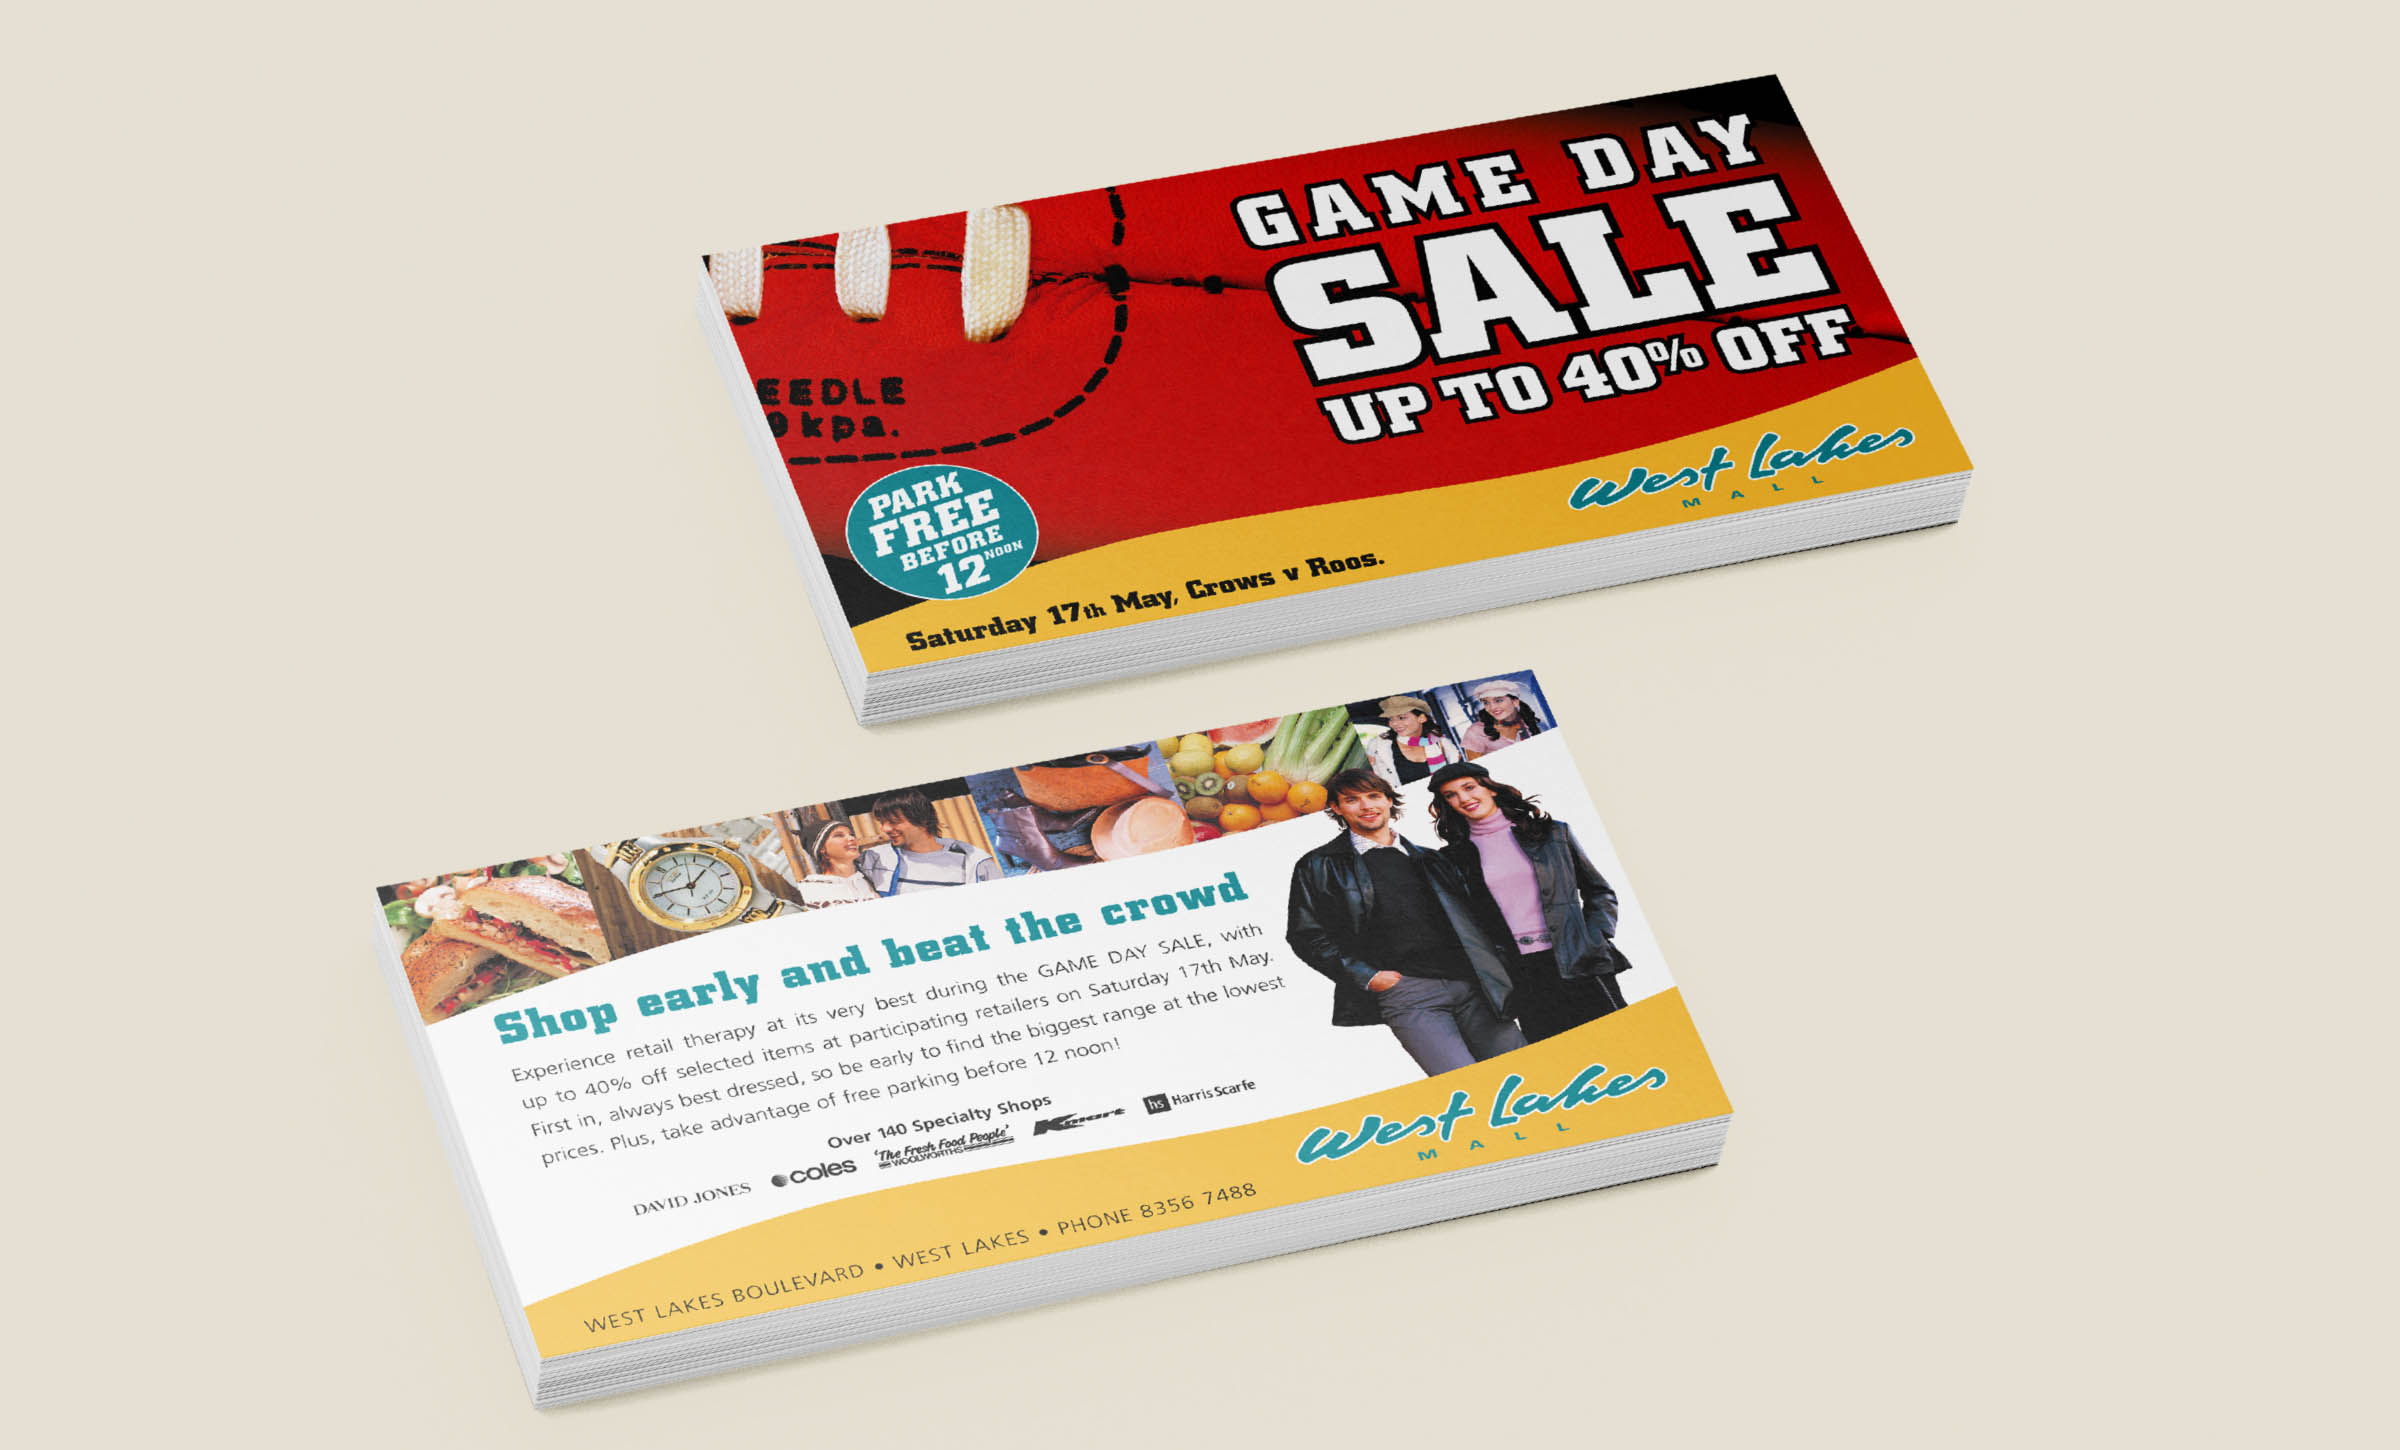 NRG Digital - West Lakes Mall Game Day Sale